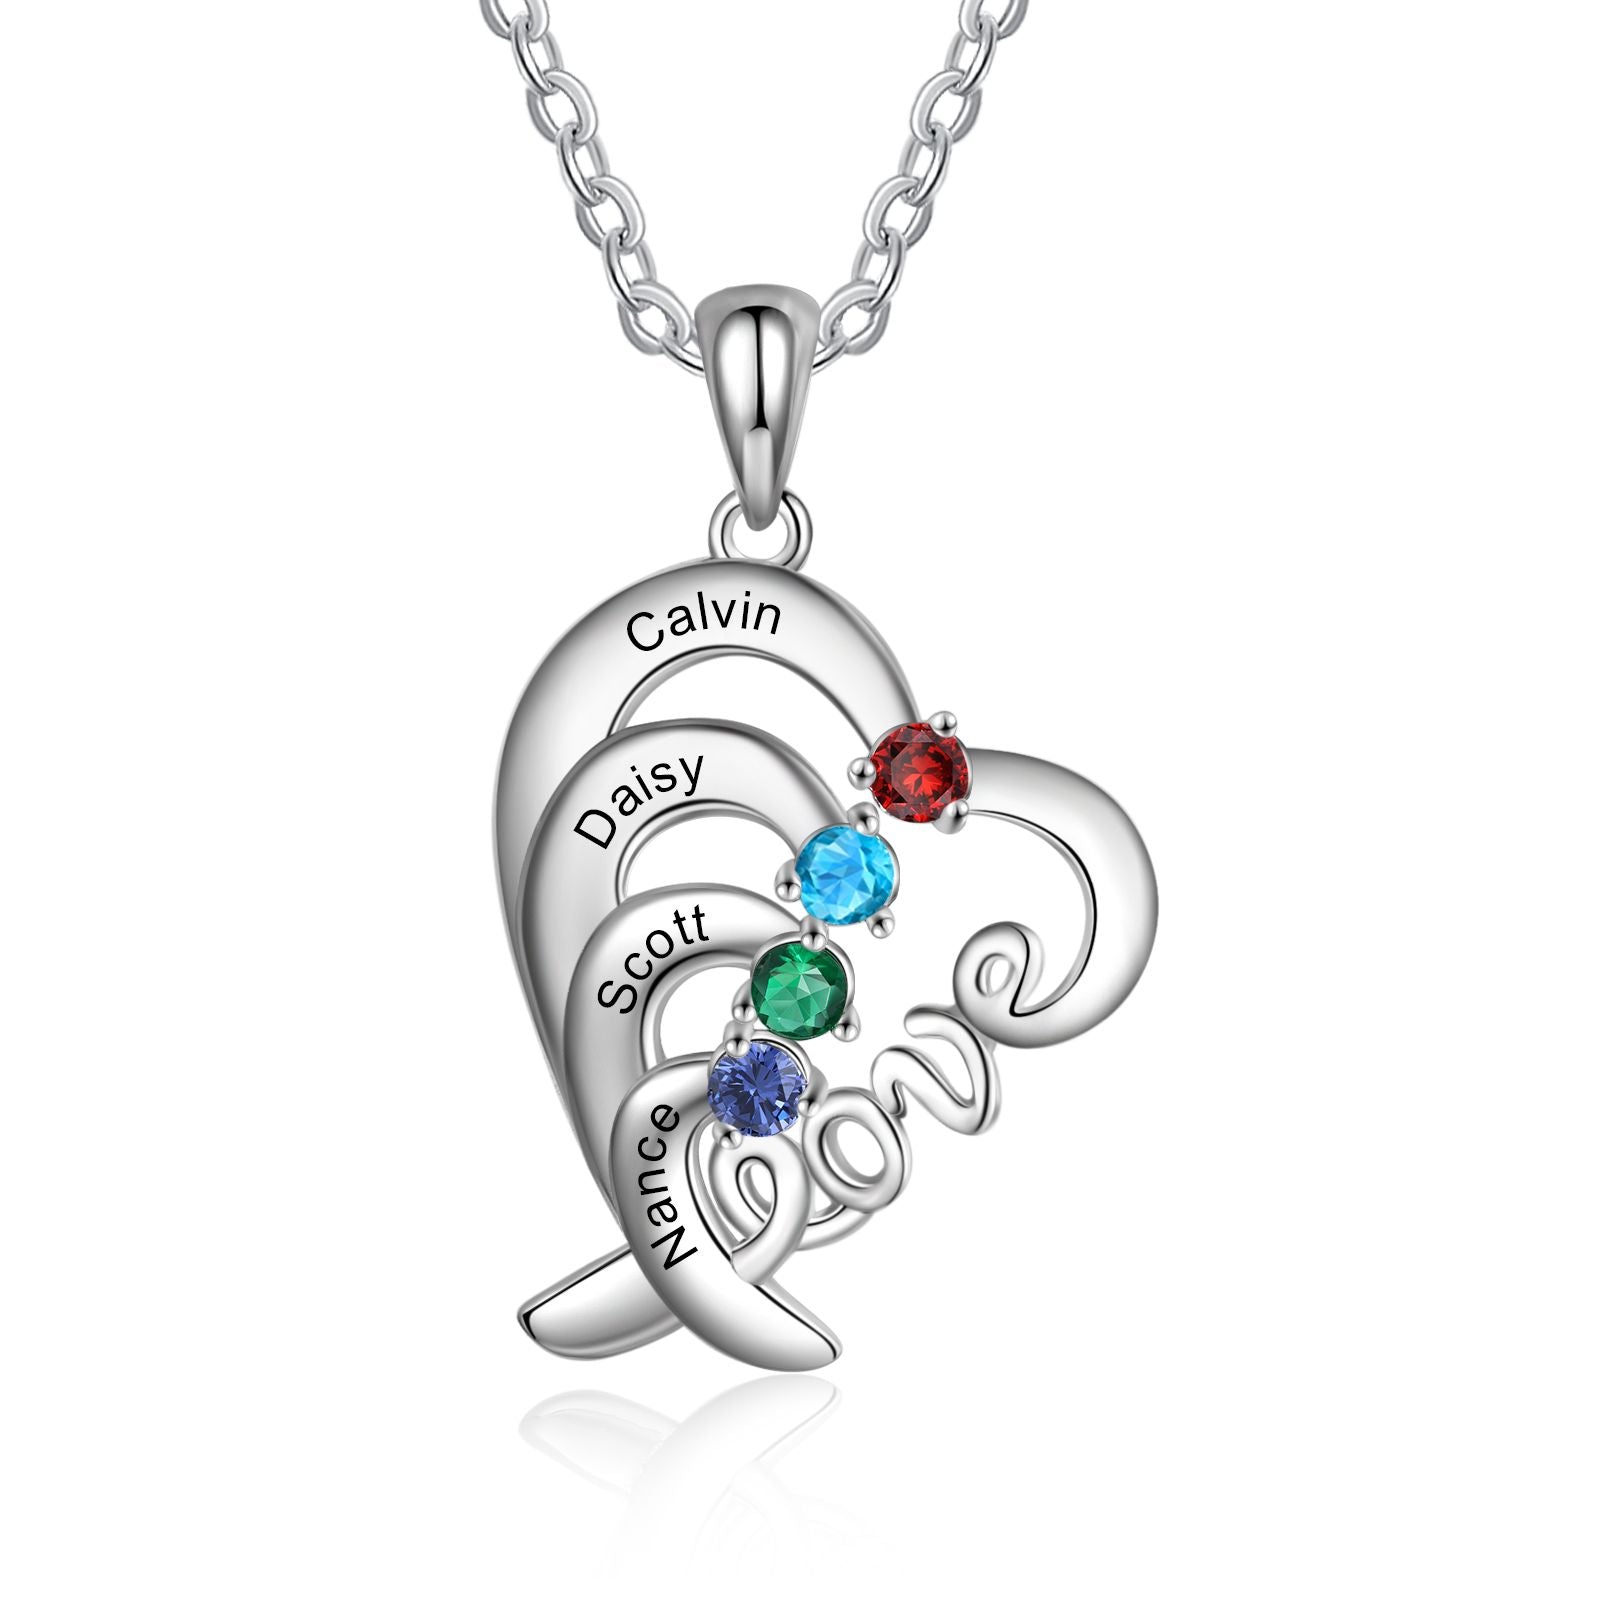 Love Necklace | Customised 2-4 Birthstone Necklace With Engraved Names